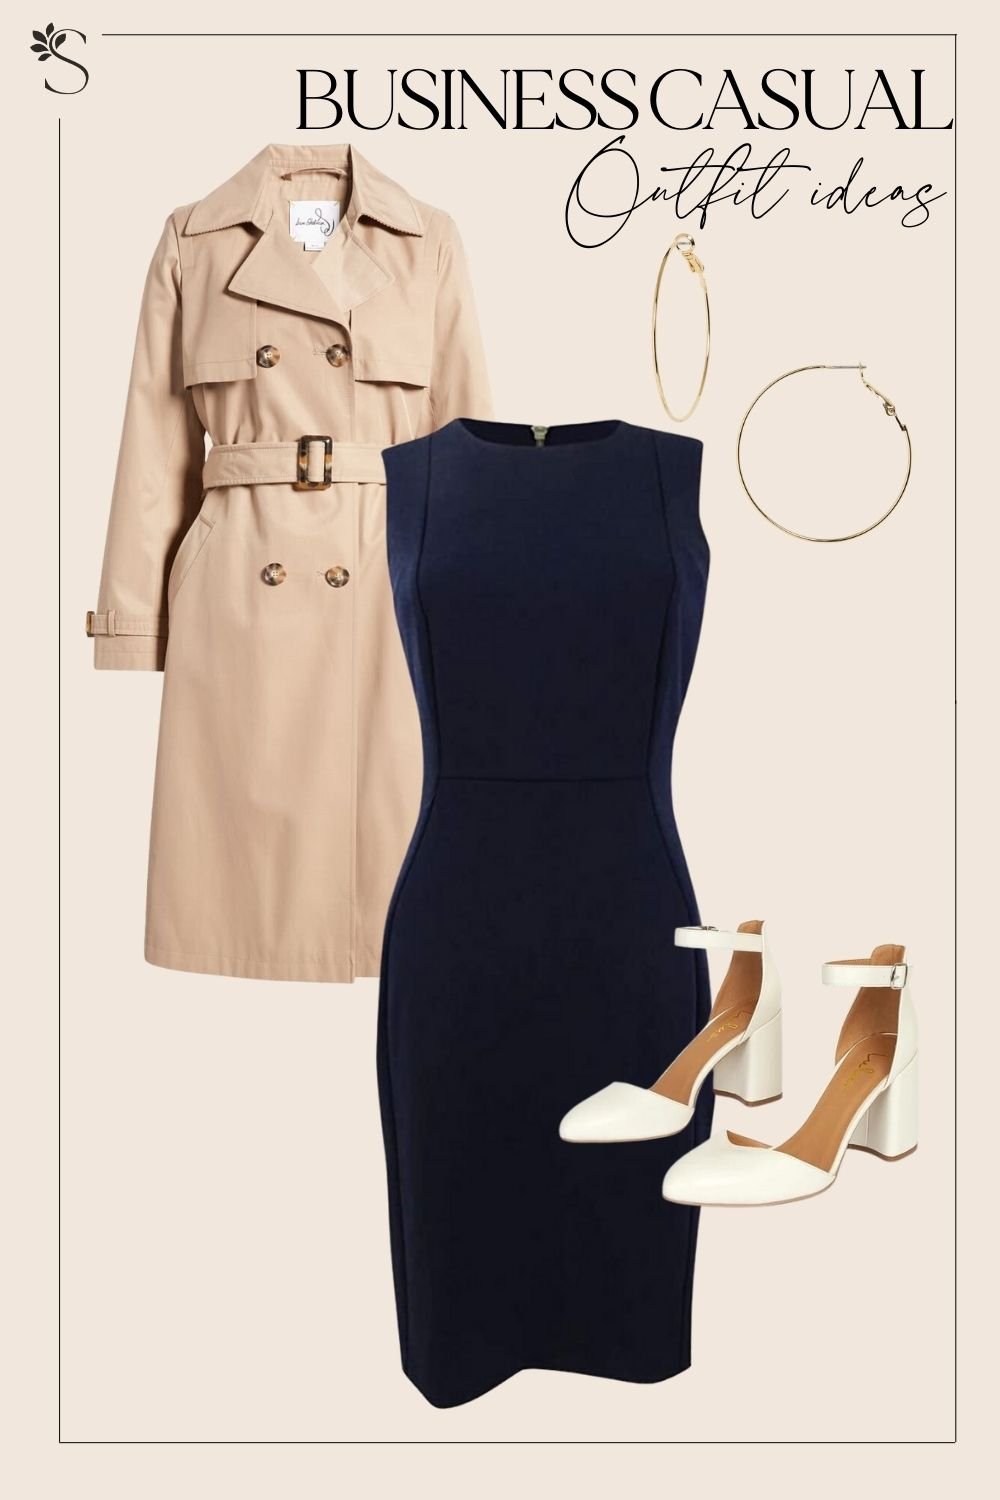 15 Work Wardrobe Essentials For Every Boss-Lady – Current Boutique